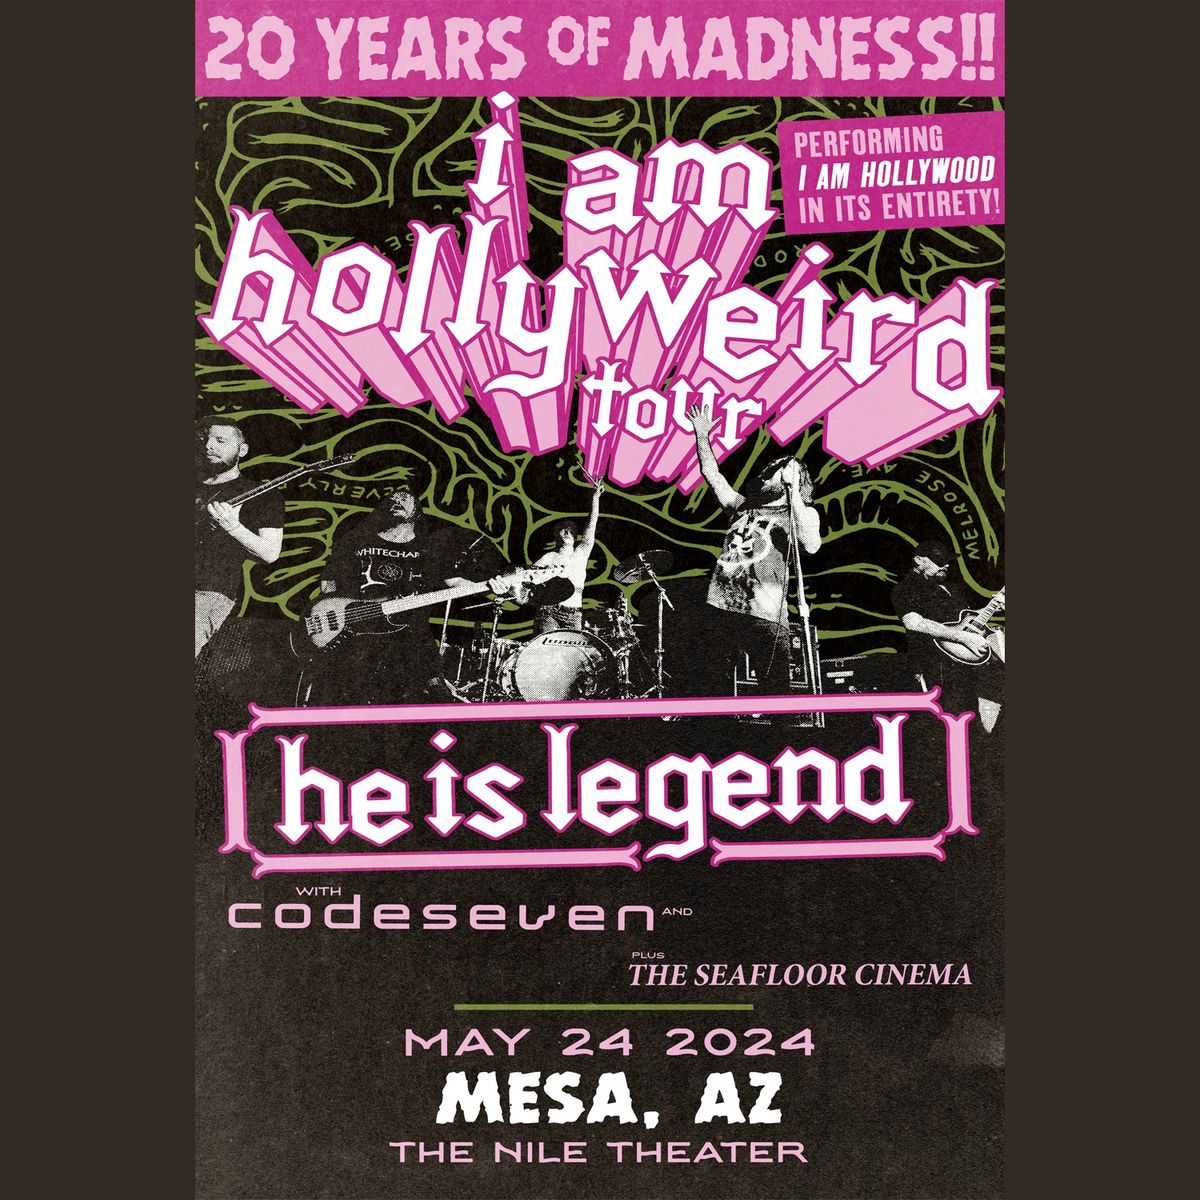 HE IS LEGEND PRESENTS: I AM HOLLYWOOD 20 YEARS OF MADNESS